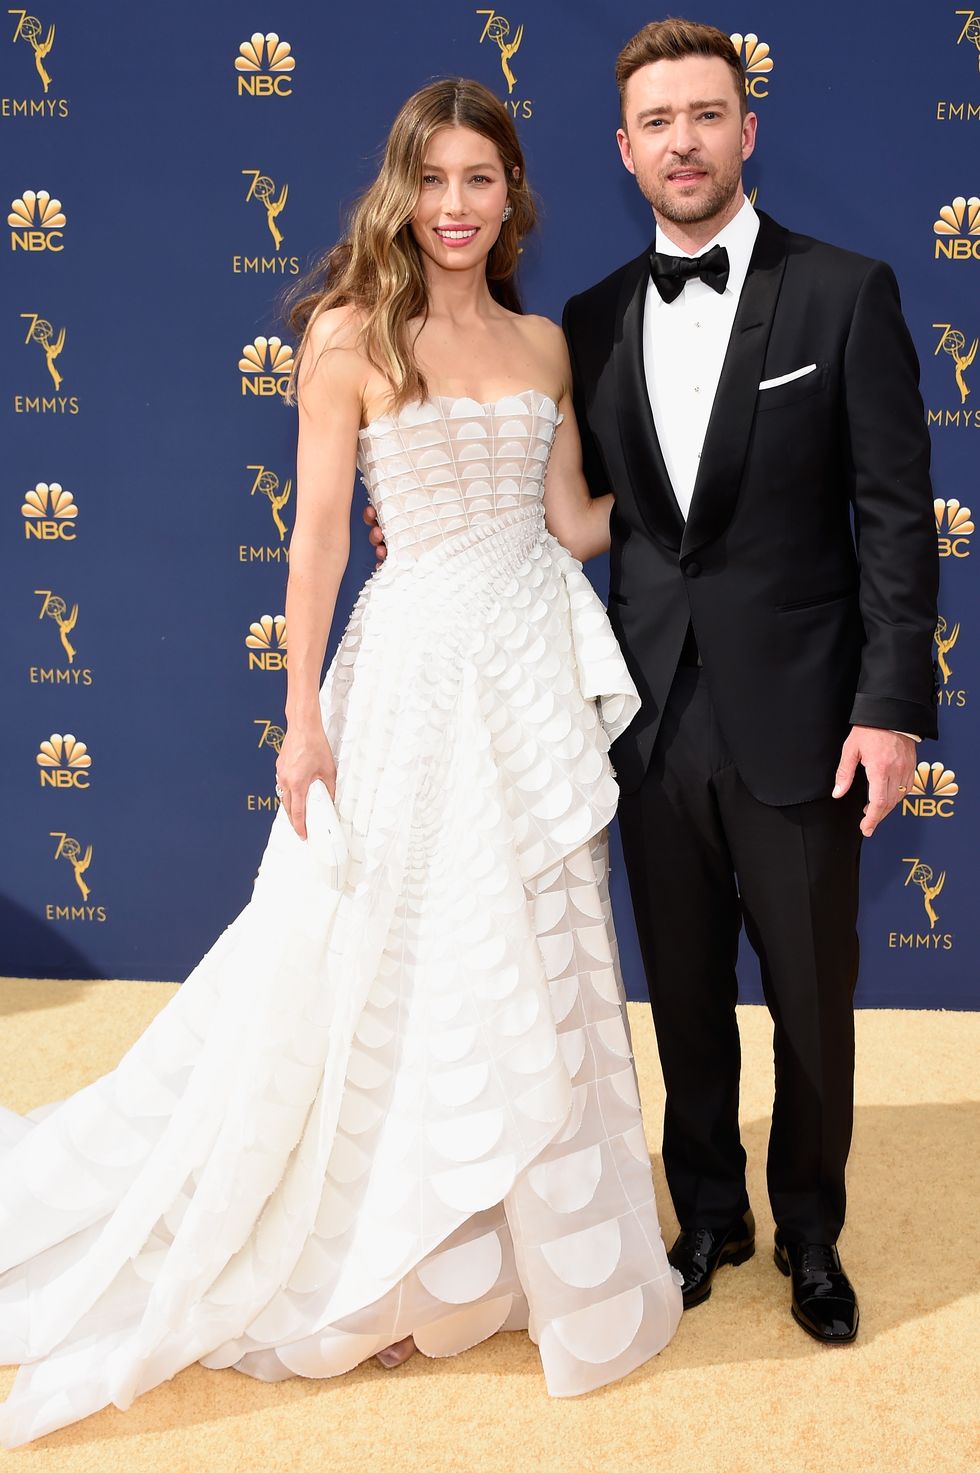 Justin Timberlake and Jessica Biel are without doubt the star